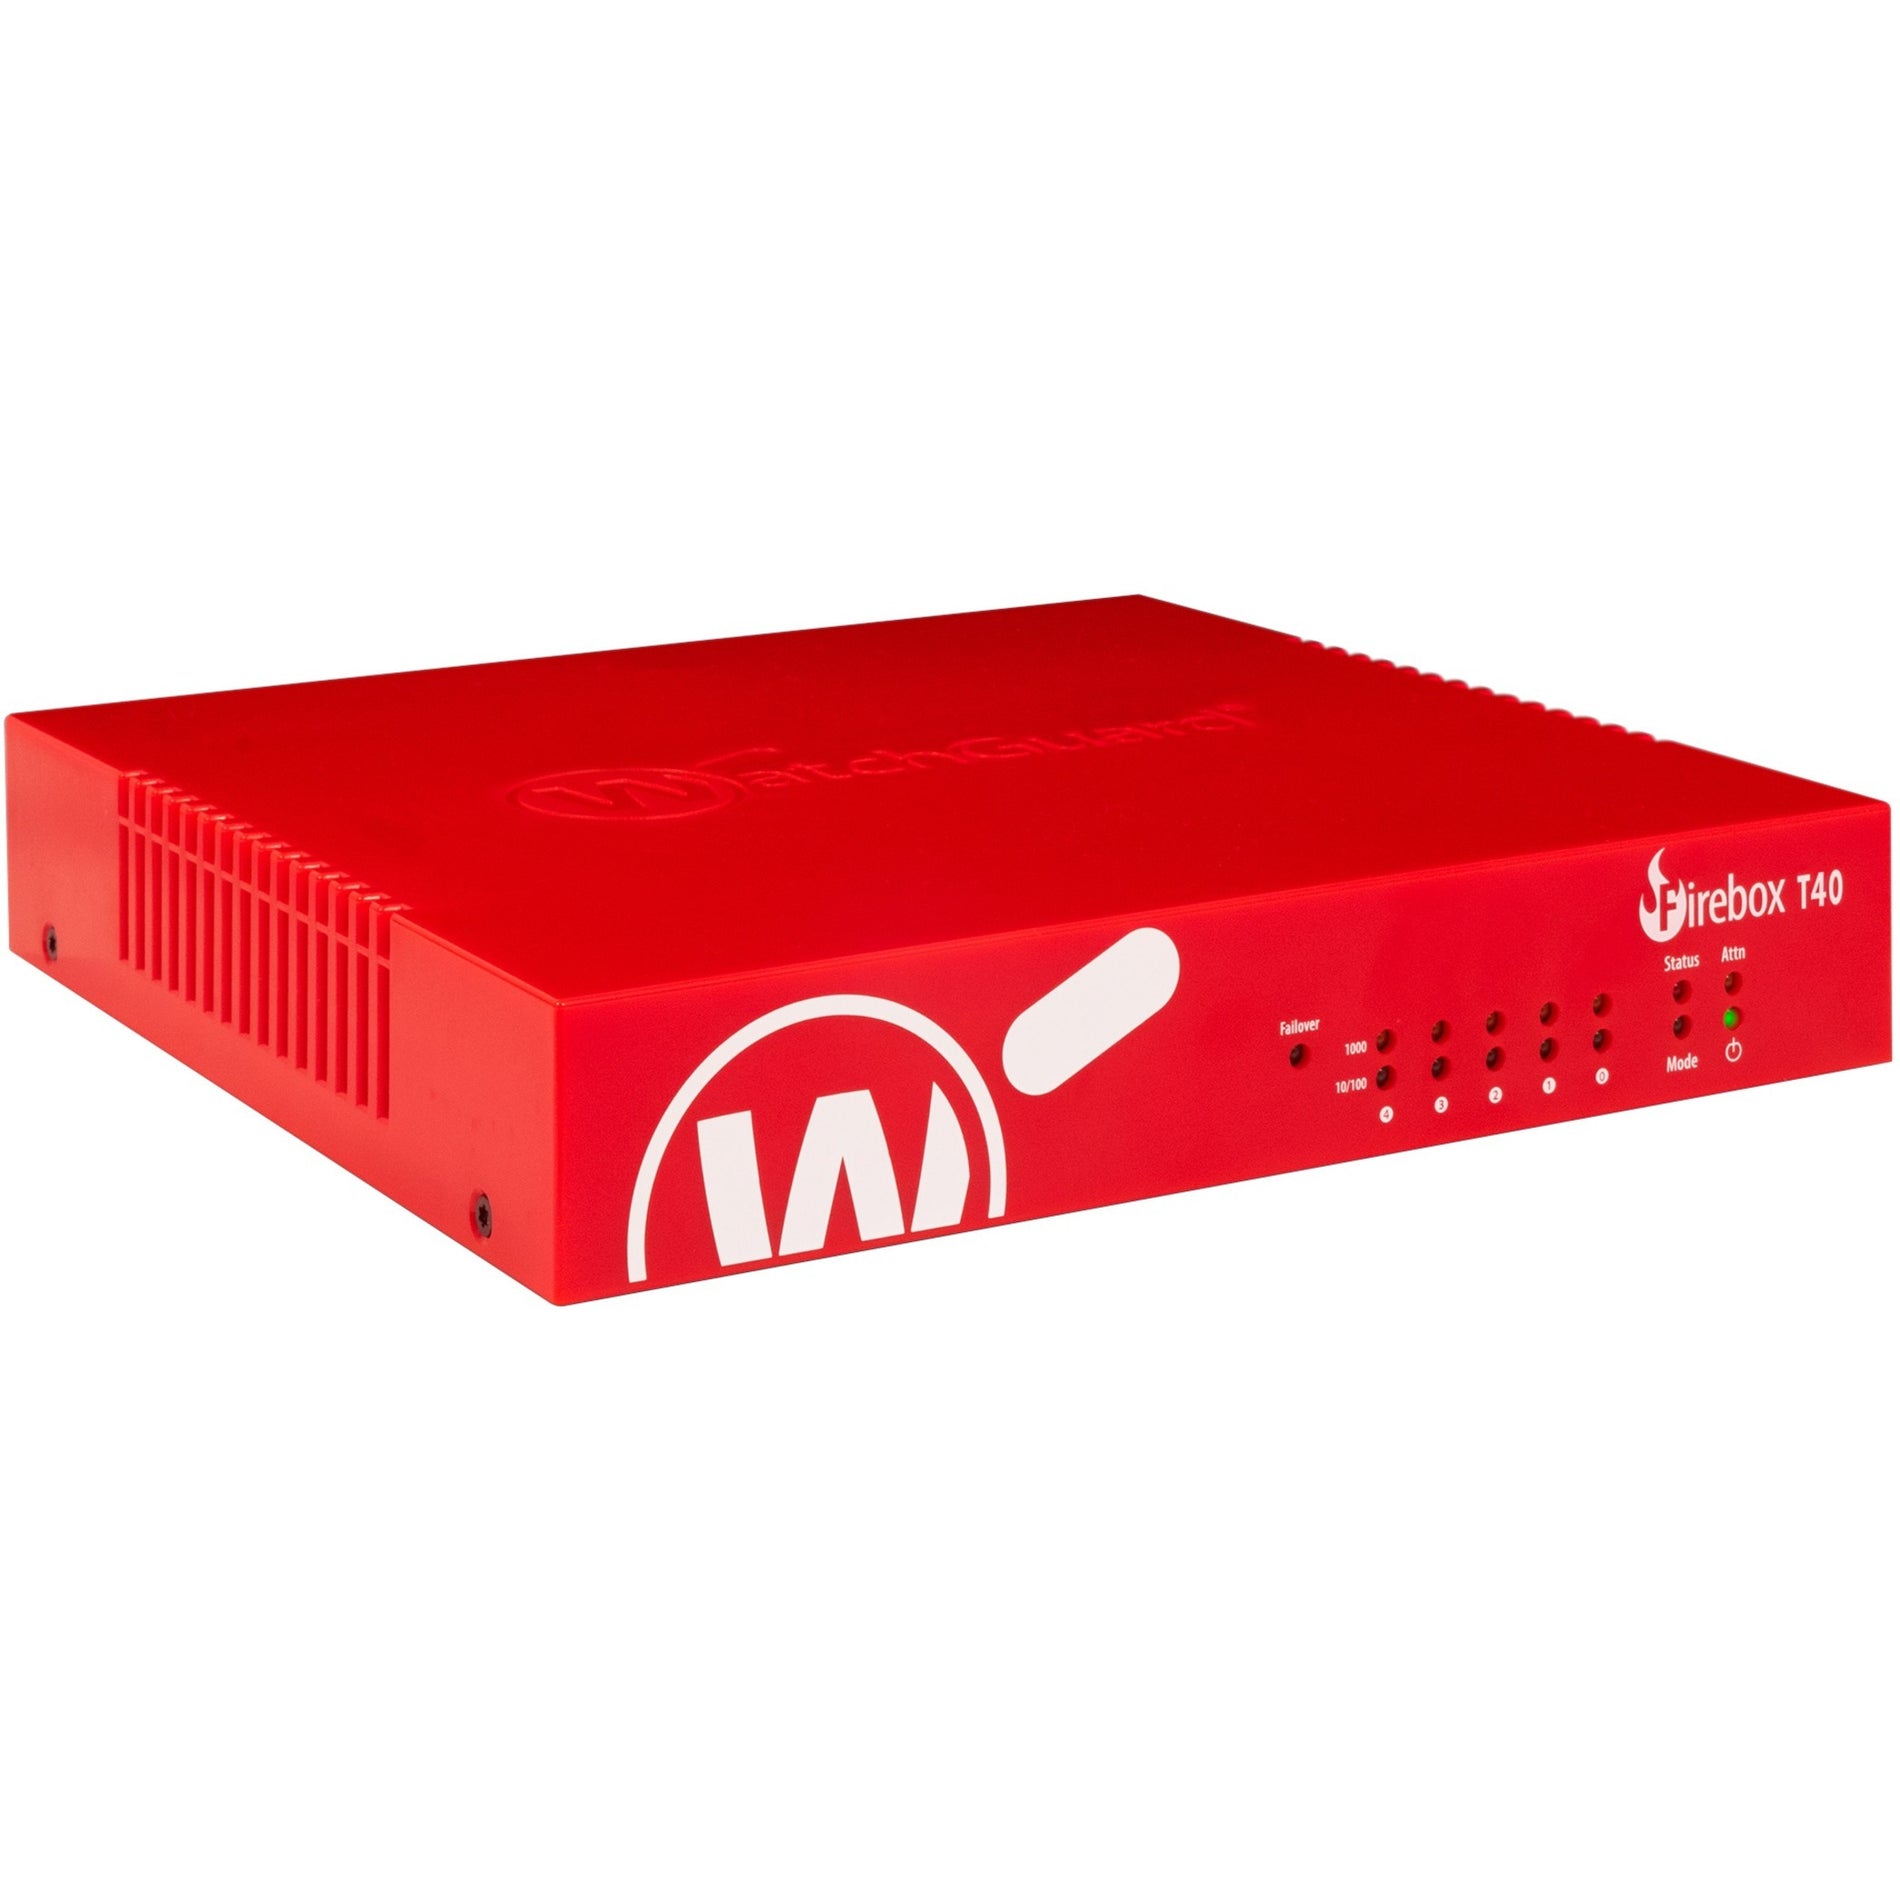 WatchGuard Firebox T40-W with 3-Year Basic Security Suite (US) [Discontinued]